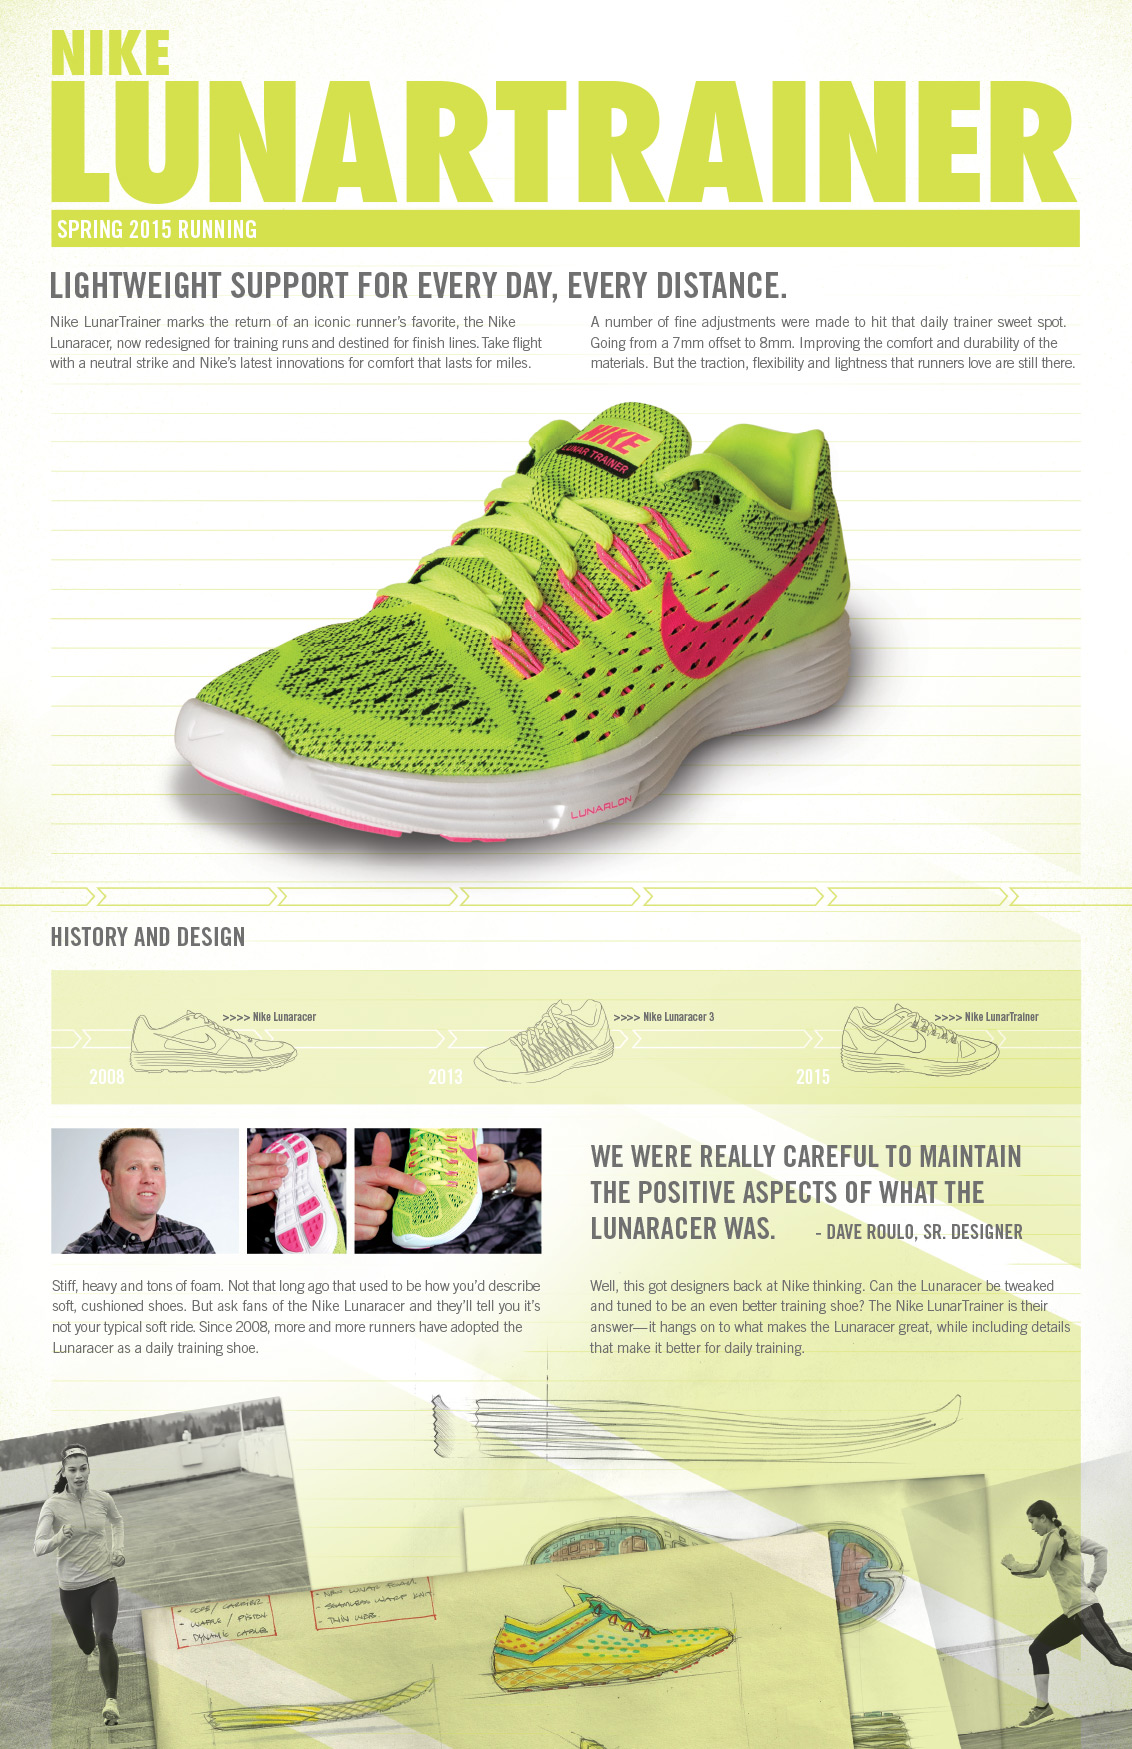 Nike Running Specialty Product Catalog design created by Incubate Design